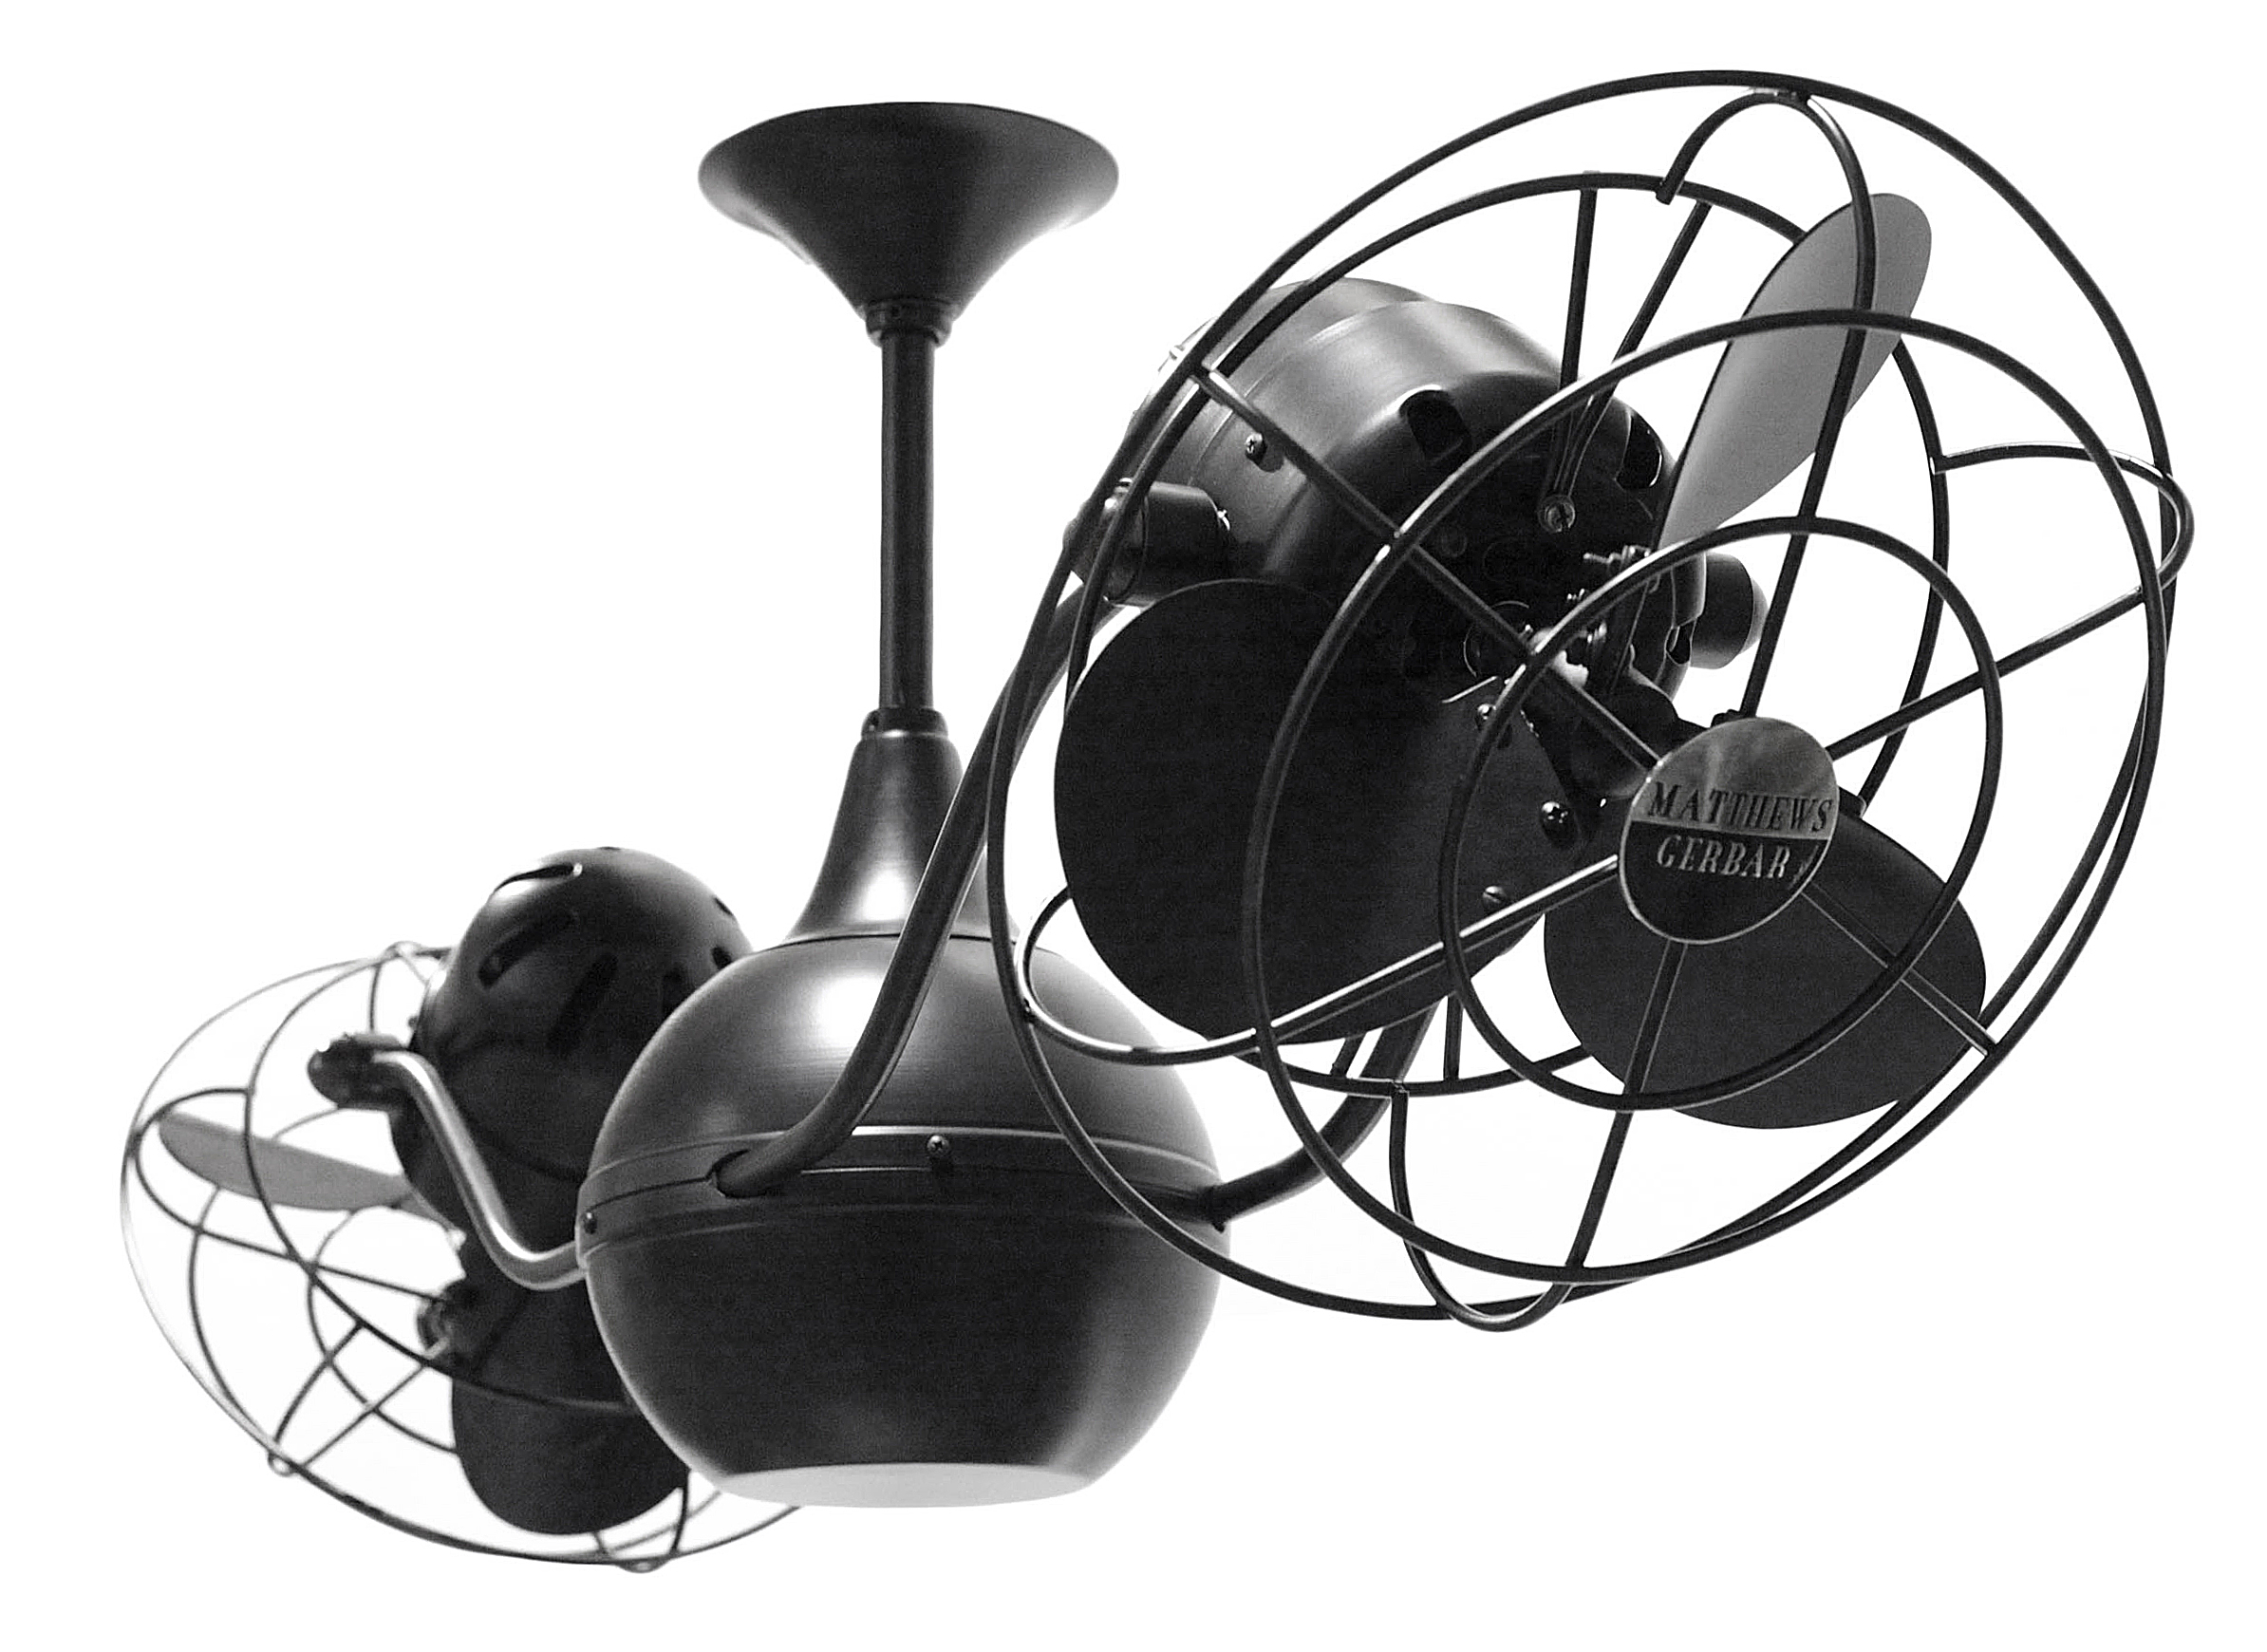 Vent-Bettina Rotational Dual Head Ceiling Fan in Black Finish with Metal Blades and Decorative Cage